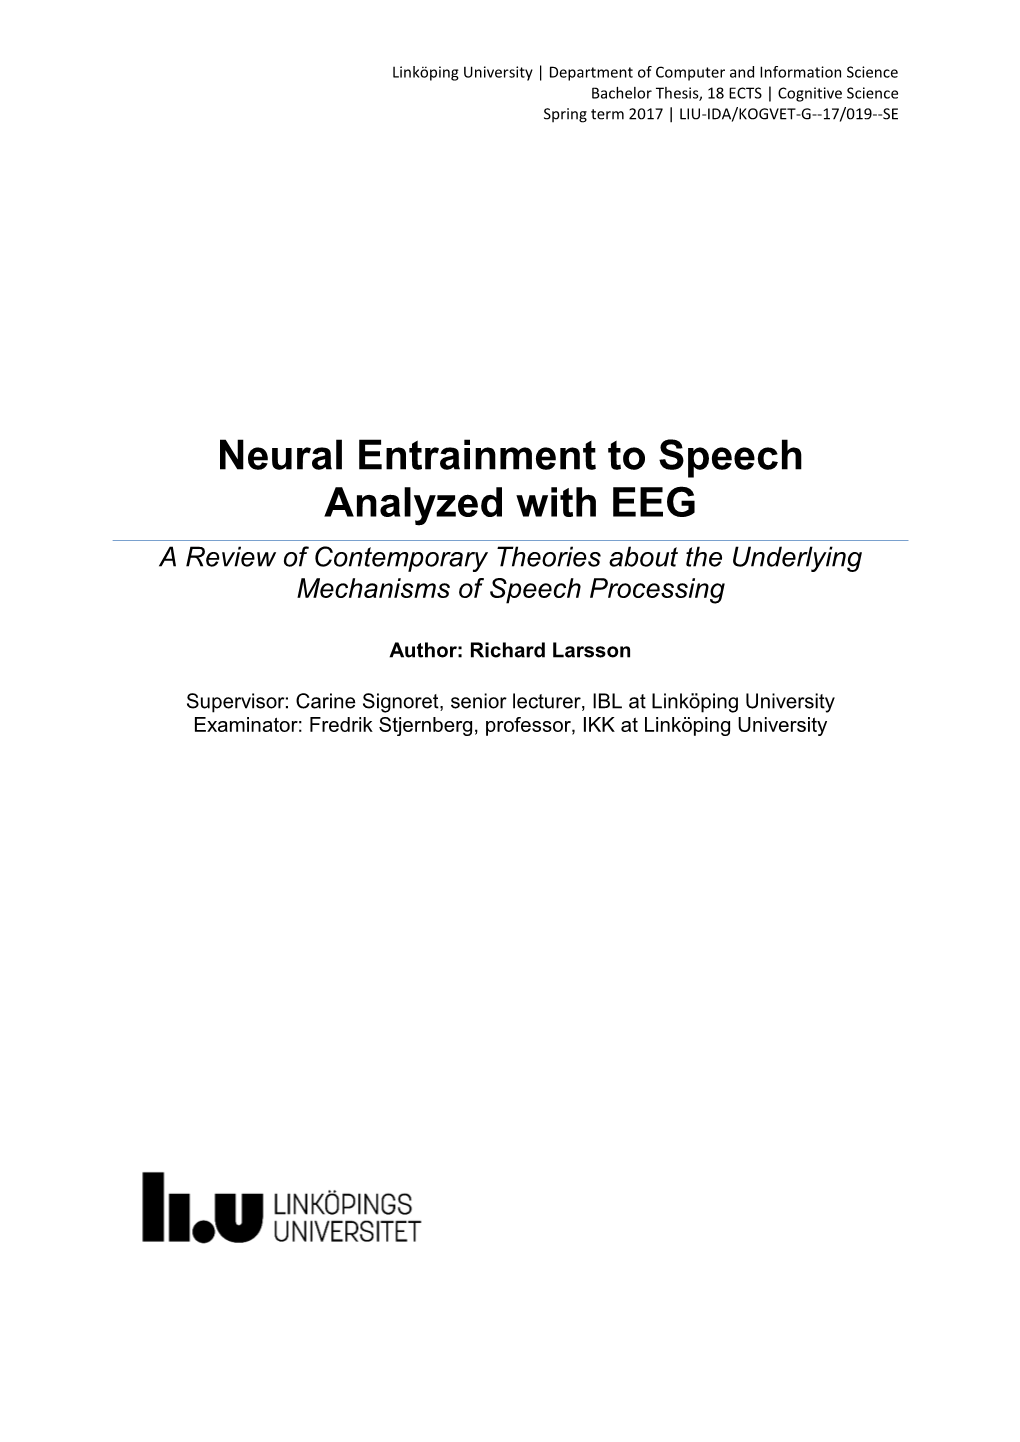 Neural Entrainment to Speech Analyzed with EEG a Review of Contemporary Theories About the Underlying Mechanisms of Speech Processing